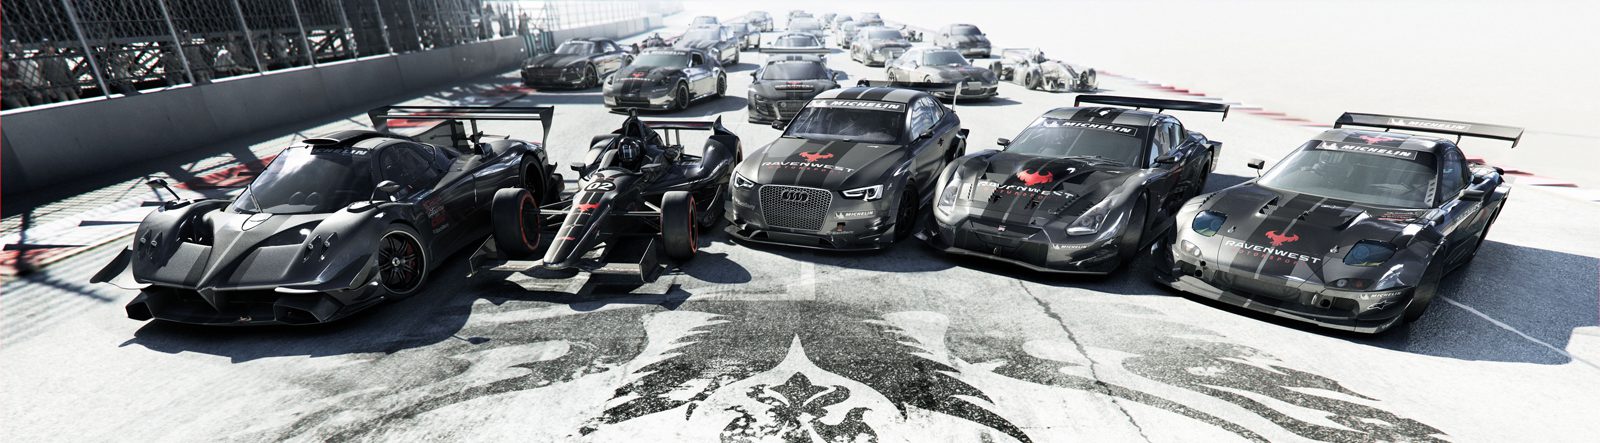 GRID Autosport is receiving two new multiplayer modes on Switch